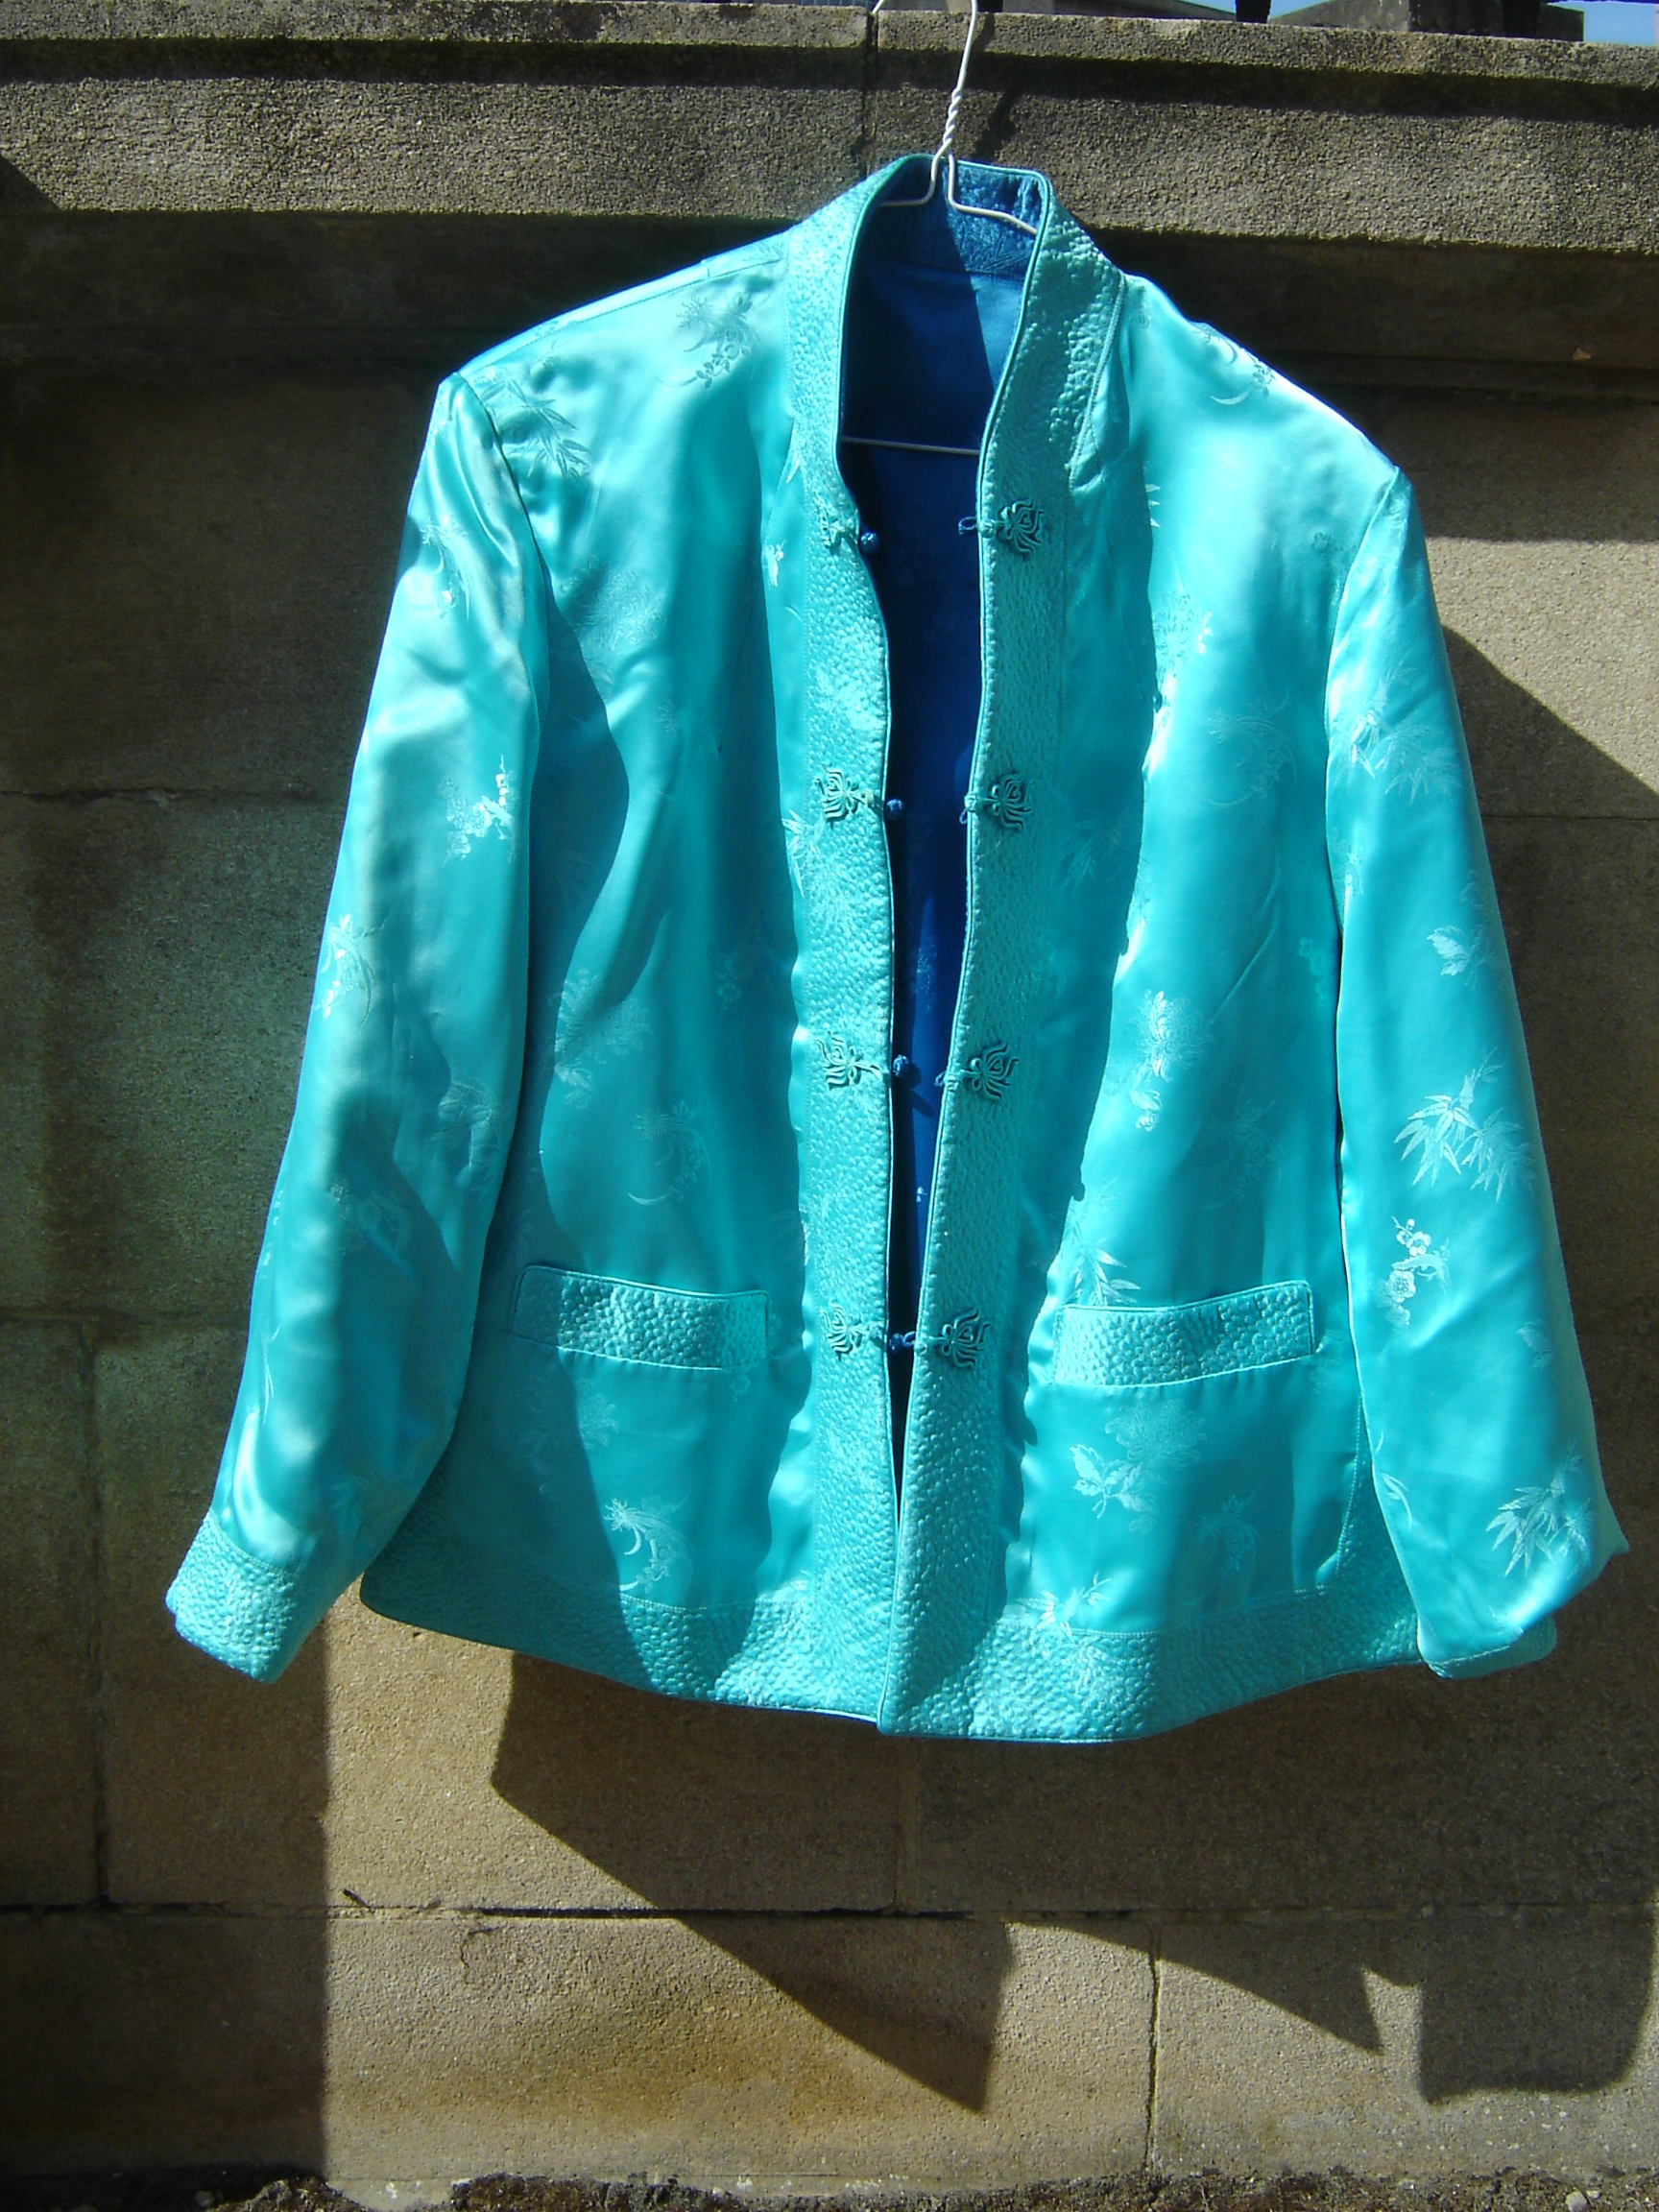 Blue and turquoise reversible silk Chinese jacket, from Unicorn, 5 Ship Street, Oxford